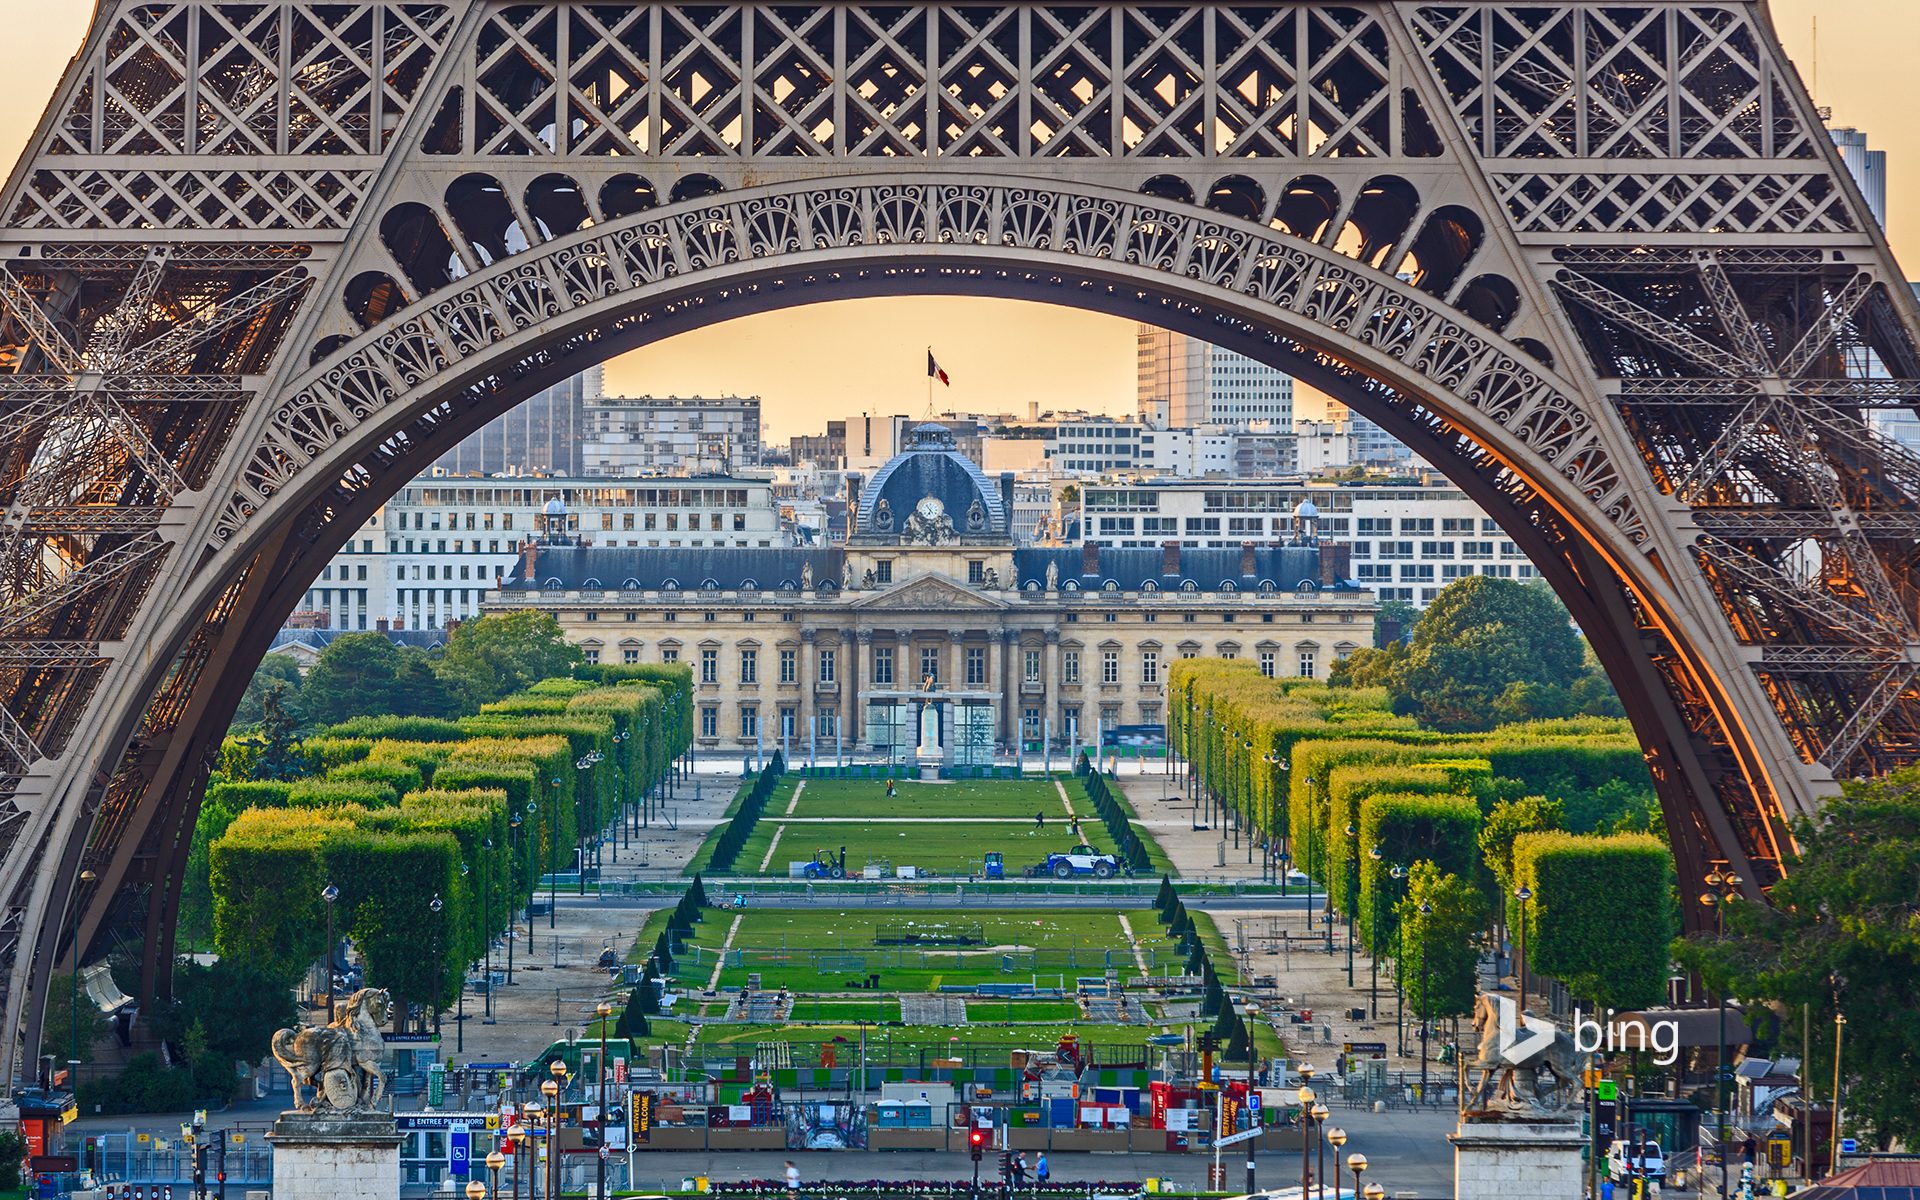 View of the Eiffel Tower from the Trocadero, Paris, France